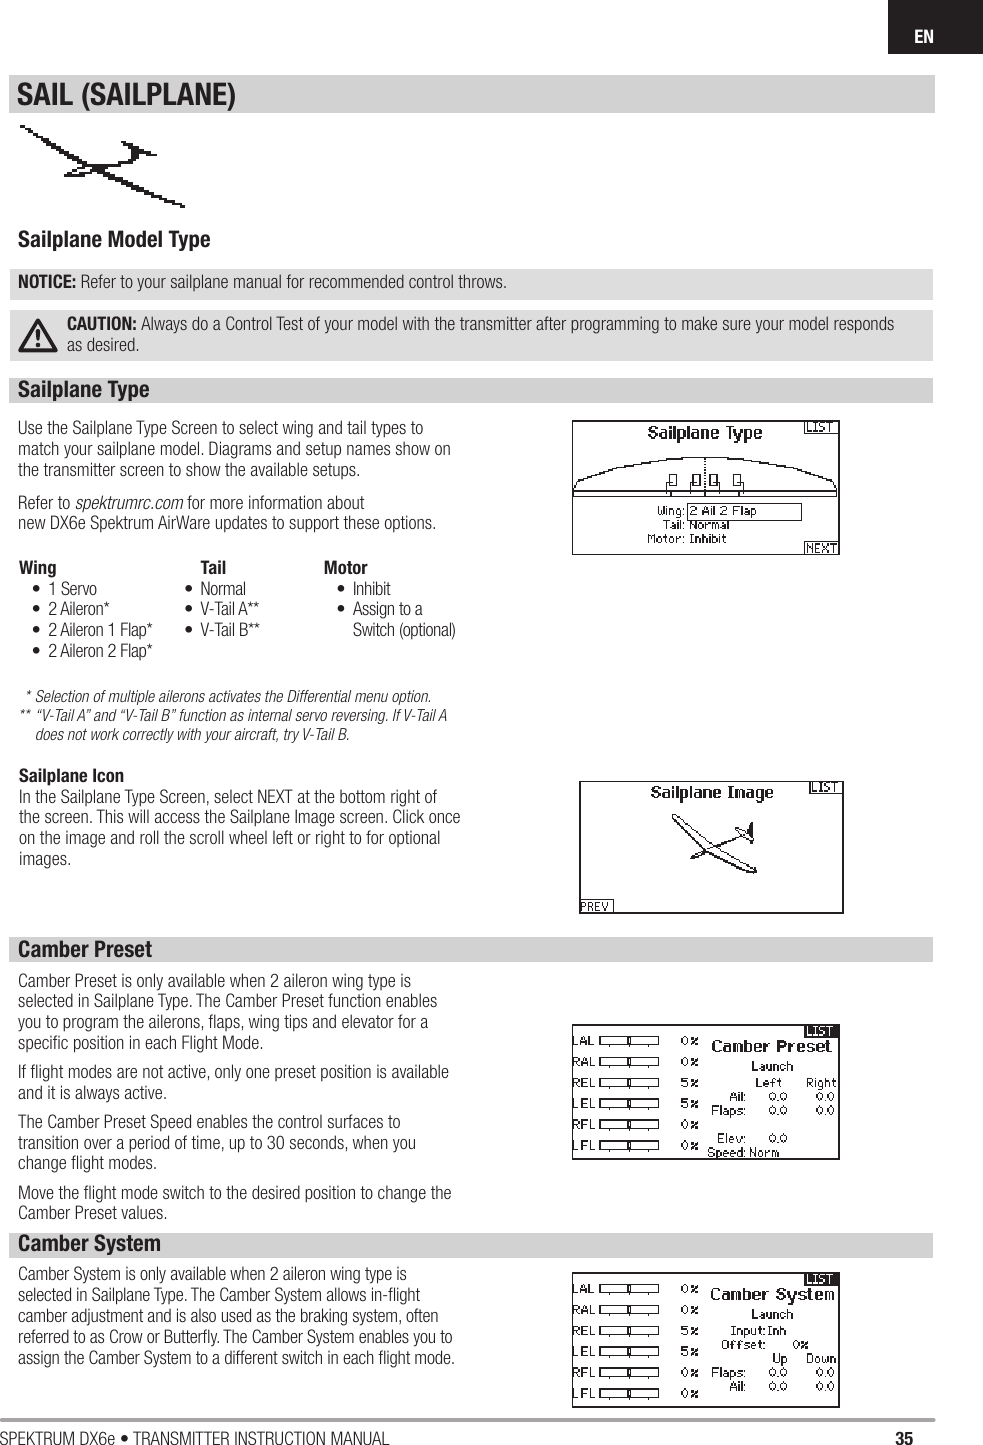 35SPEKTRUM DX6e • TRANSMITTER INSTRUCTION MANUALENSailplane Type Use the Sailplane Type Screen to select wing and tail types to match your sailplane model. Diagrams and setup names show on the transmitter screen to show the available setups.Refer to spektrumrc.com for more information about new DX6e Spektrum AirWare updates to support these options.* Selection of multiple ailerons activates the Differential menu option.** “V-Tail A” and “V-Tail B” function as internal servo reversing. If V-Tail A    does not work correctly with your aircraft, try V-Tail B.Camber PresetCamber Preset is only available when 2 aileron wing type is selected in Sailplane Type. The Camber Preset function enables you to program the ailerons, ﬂ aps, wing tips and elevator for a speciﬁ c position in each Flight Mode.If ﬂ ight modes are not active, only one preset position is available and it is always active.The Camber Preset Speed enables the control surfaces to transition over a period of time, up to 30 seconds, when you change ﬂ ight modes.Move the ﬂ ight mode switch to the desired position to change the Camber Preset values.Wing• 1 Servo• 2 Aileron*•  2 Aileron 1 Flap*•  2 Aileron 2 Flap*Tail• Normal• V-Tail A**• V-Tail B**Motor• Inhibit•  Assign to a Switch (optional)Sailplane Model TypeNOTICE: Refer to your sailplane manual for recommended control throws.CAUTION: Always do a Control Test of your model with the transmitter after programming to make sure your model responds as desired. Camber SystemCamber System is only available when 2 aileron wing type is selected in Sailplane Type. The Camber System allows in-ﬂ ight camber adjustment and is also used as the braking system, often referred to as Crow or Butterﬂ y. The Camber System enables you to assign the Camber System to a different switch in each ﬂ ight mode.SAIL (SAILPLANE)Sailplane IconIn the Sailplane Type Screen, select NEXT at the bottom right of the screen. This will access the Sailplane Image screen. Click once on the image and roll the scroll wheel left or right to for optional images.